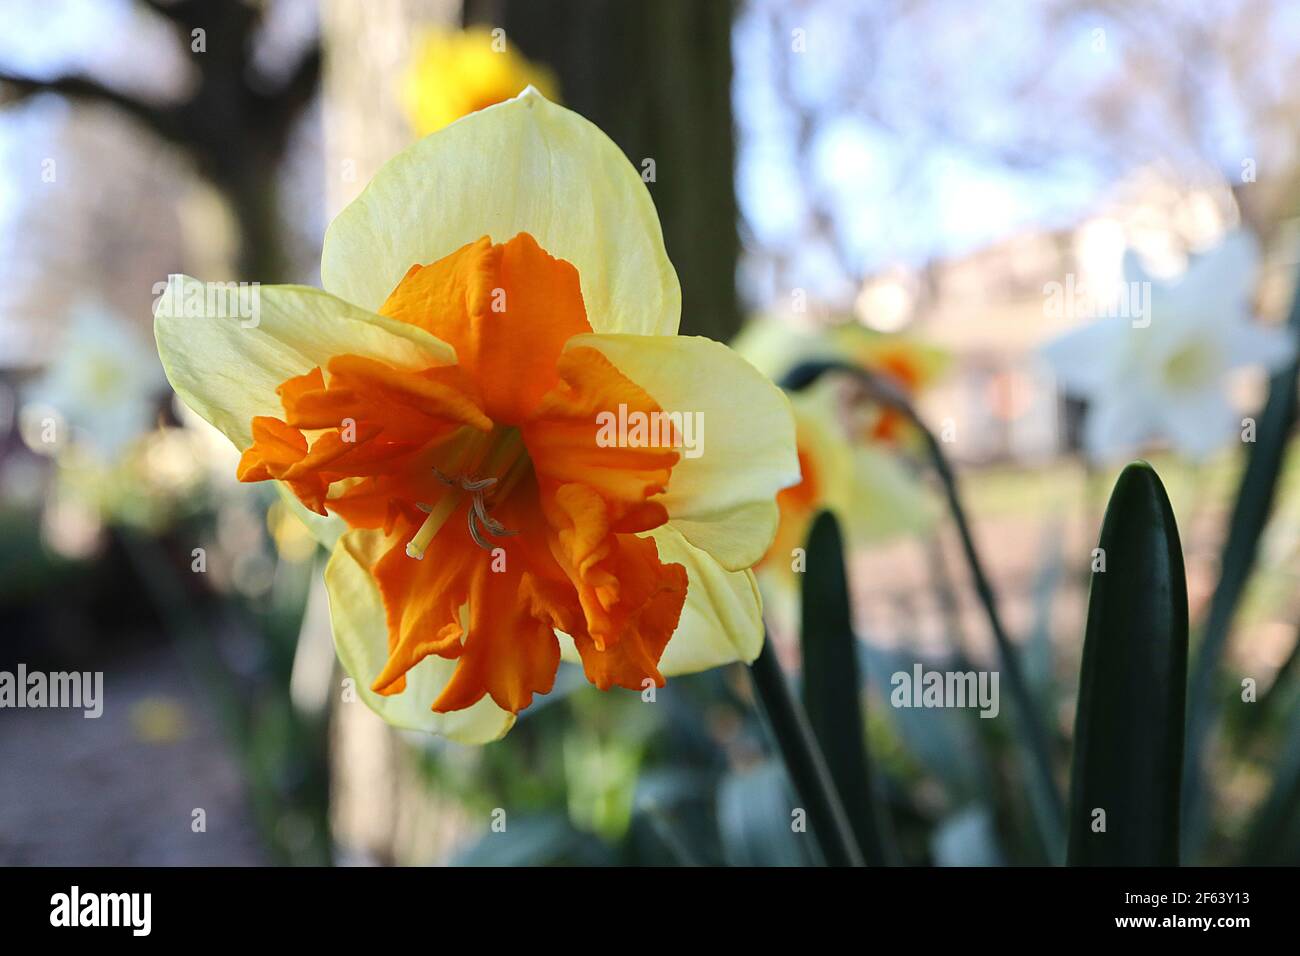 Narcissus ‘Mondragon’  Division 11a Split-Cupped Collar Daffodils,  Mondragon daffodil – pale yellow petals and orange split cup,  March, England, UK Stock Photo